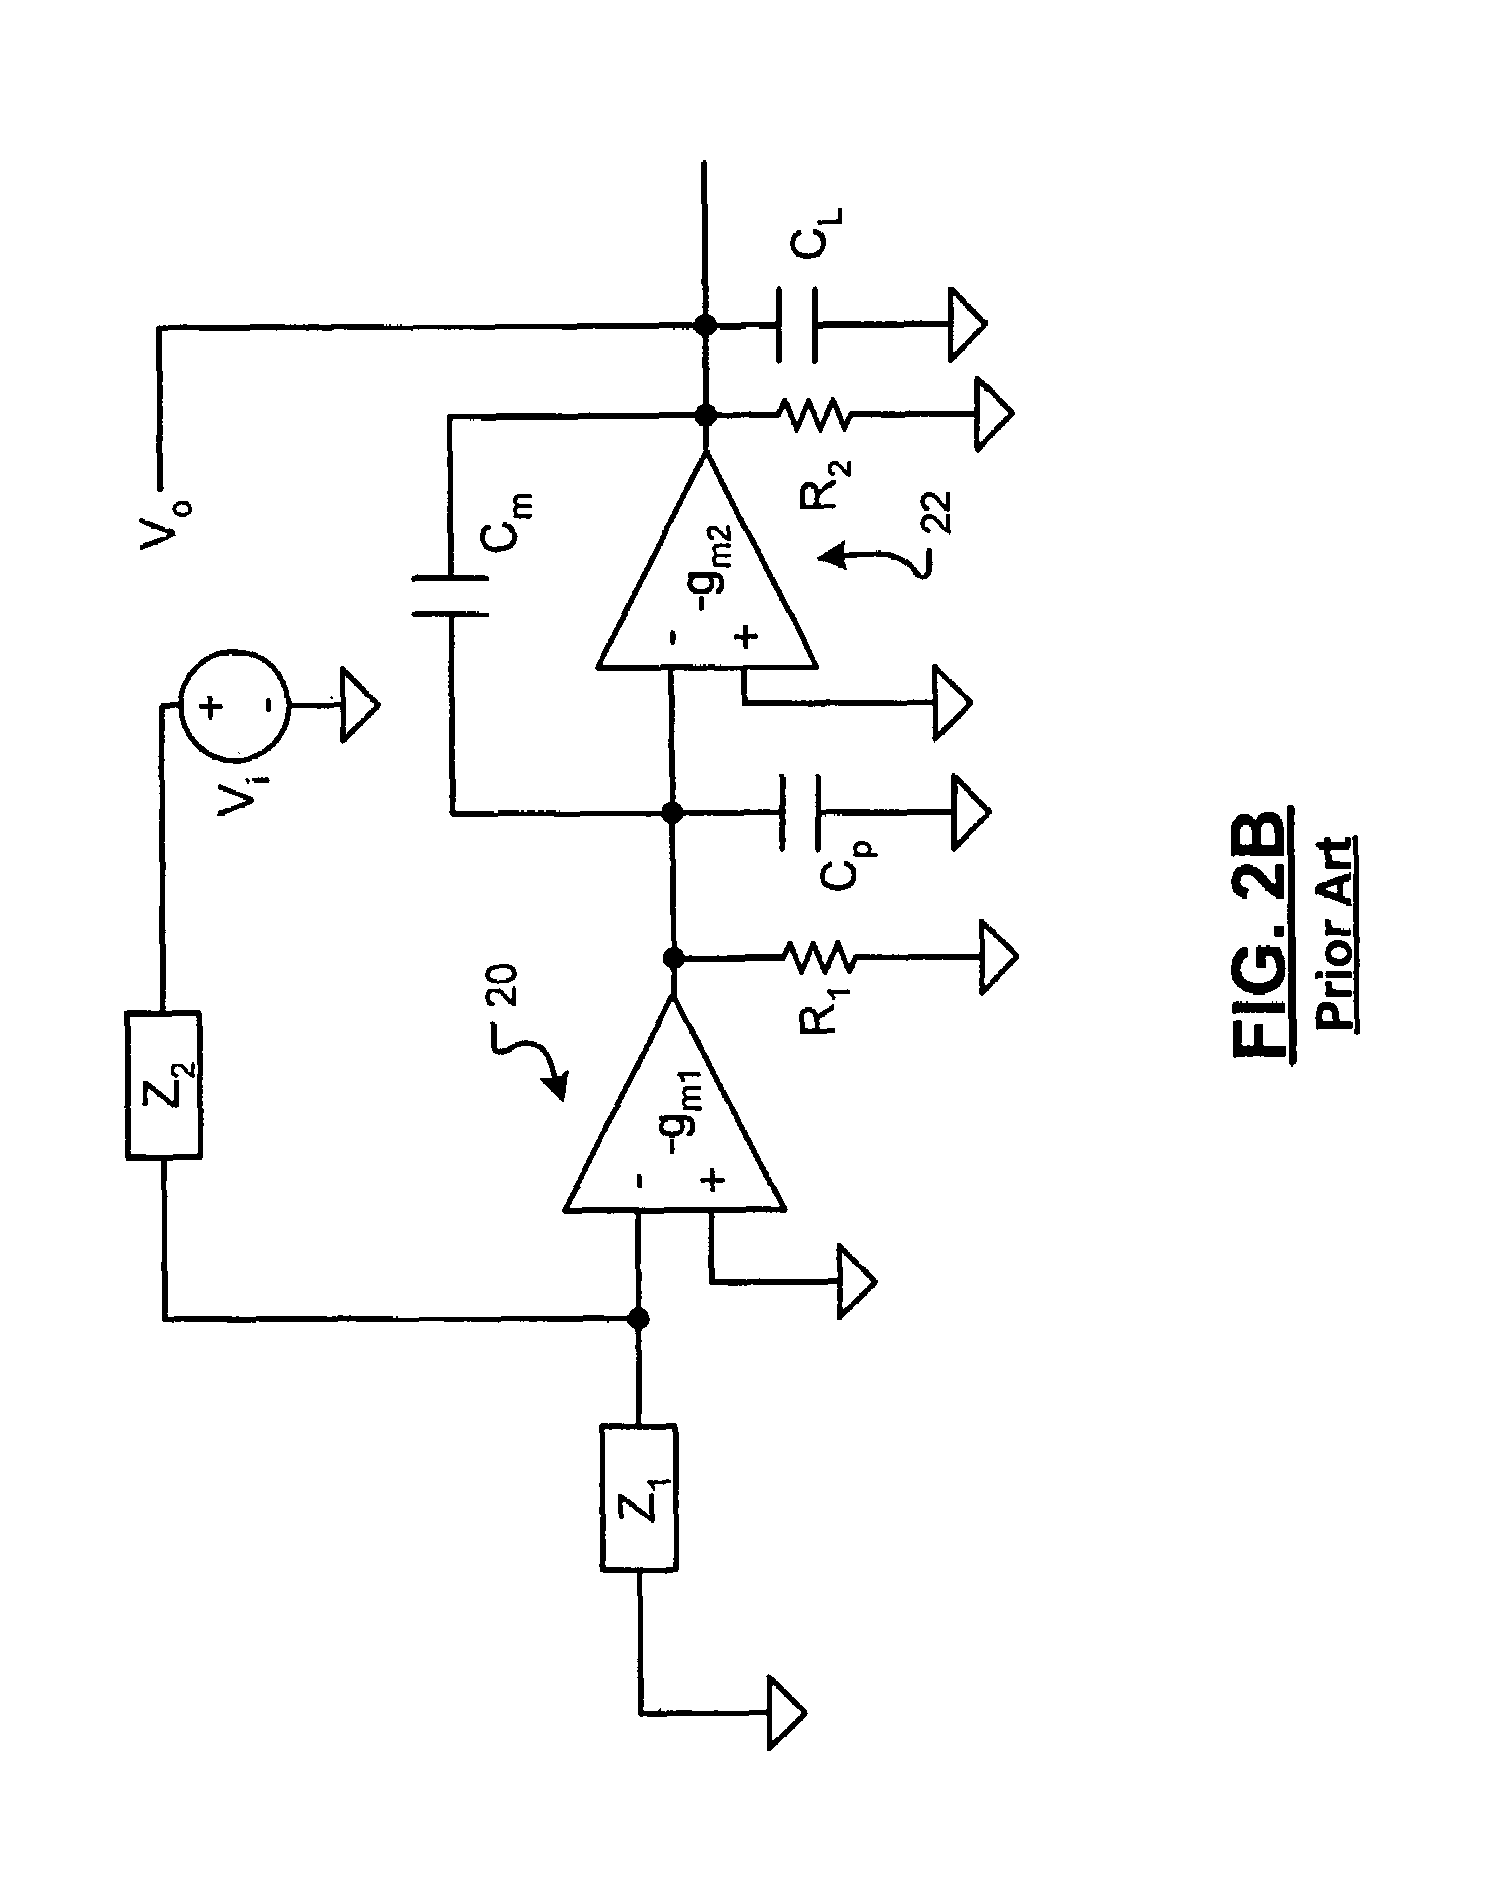 Compensation circuit for amplifiers having multiple stages